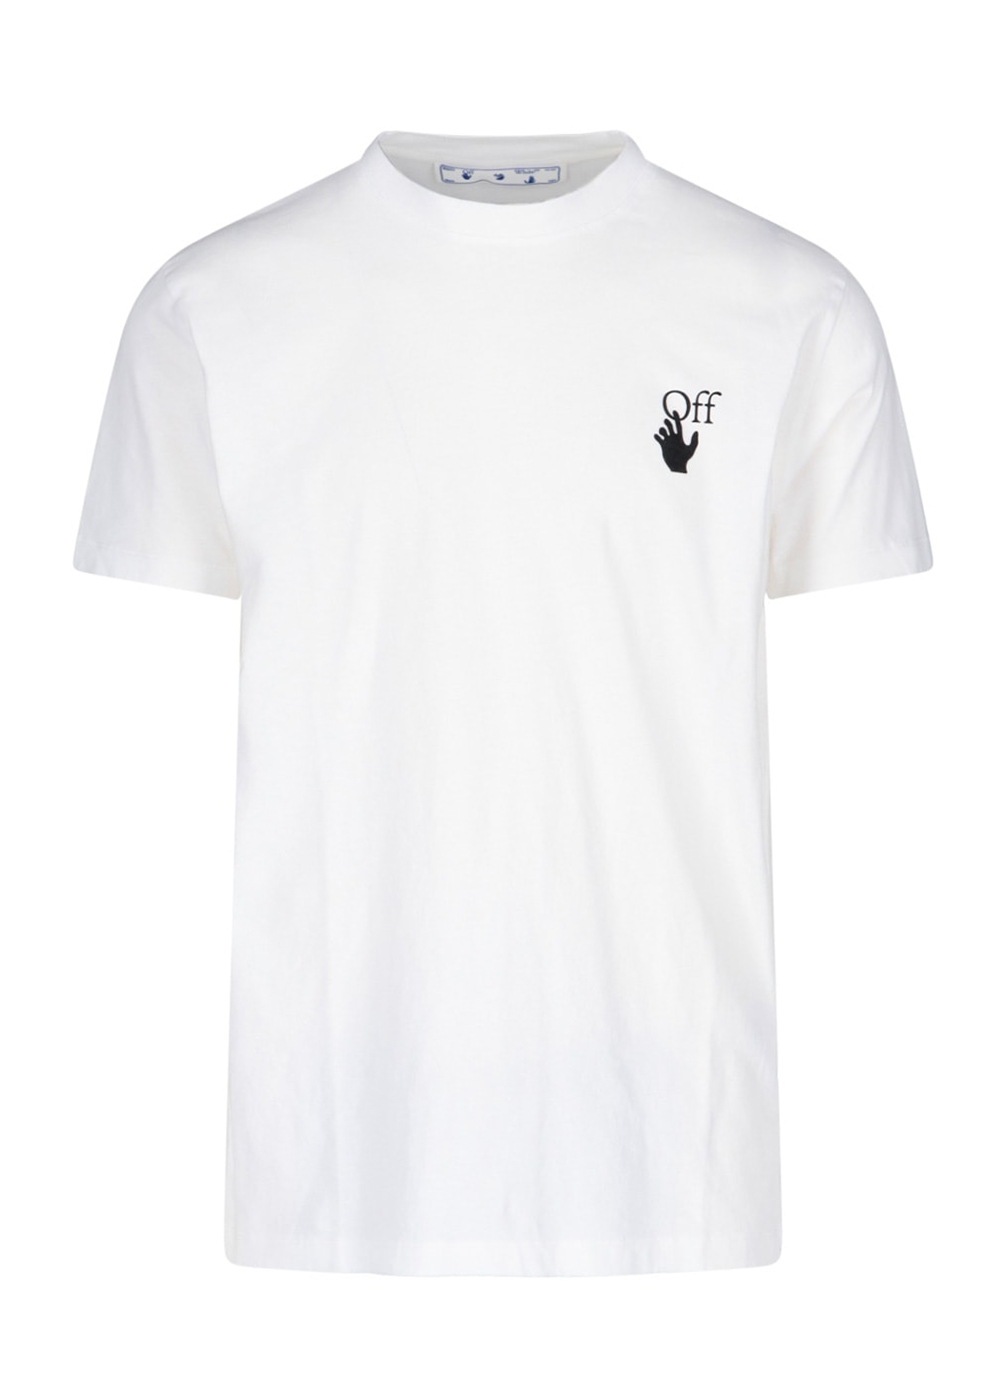 OFF-WHITE Slim Fit Caravaggio The Lute Player T-Shirt White - FW21 